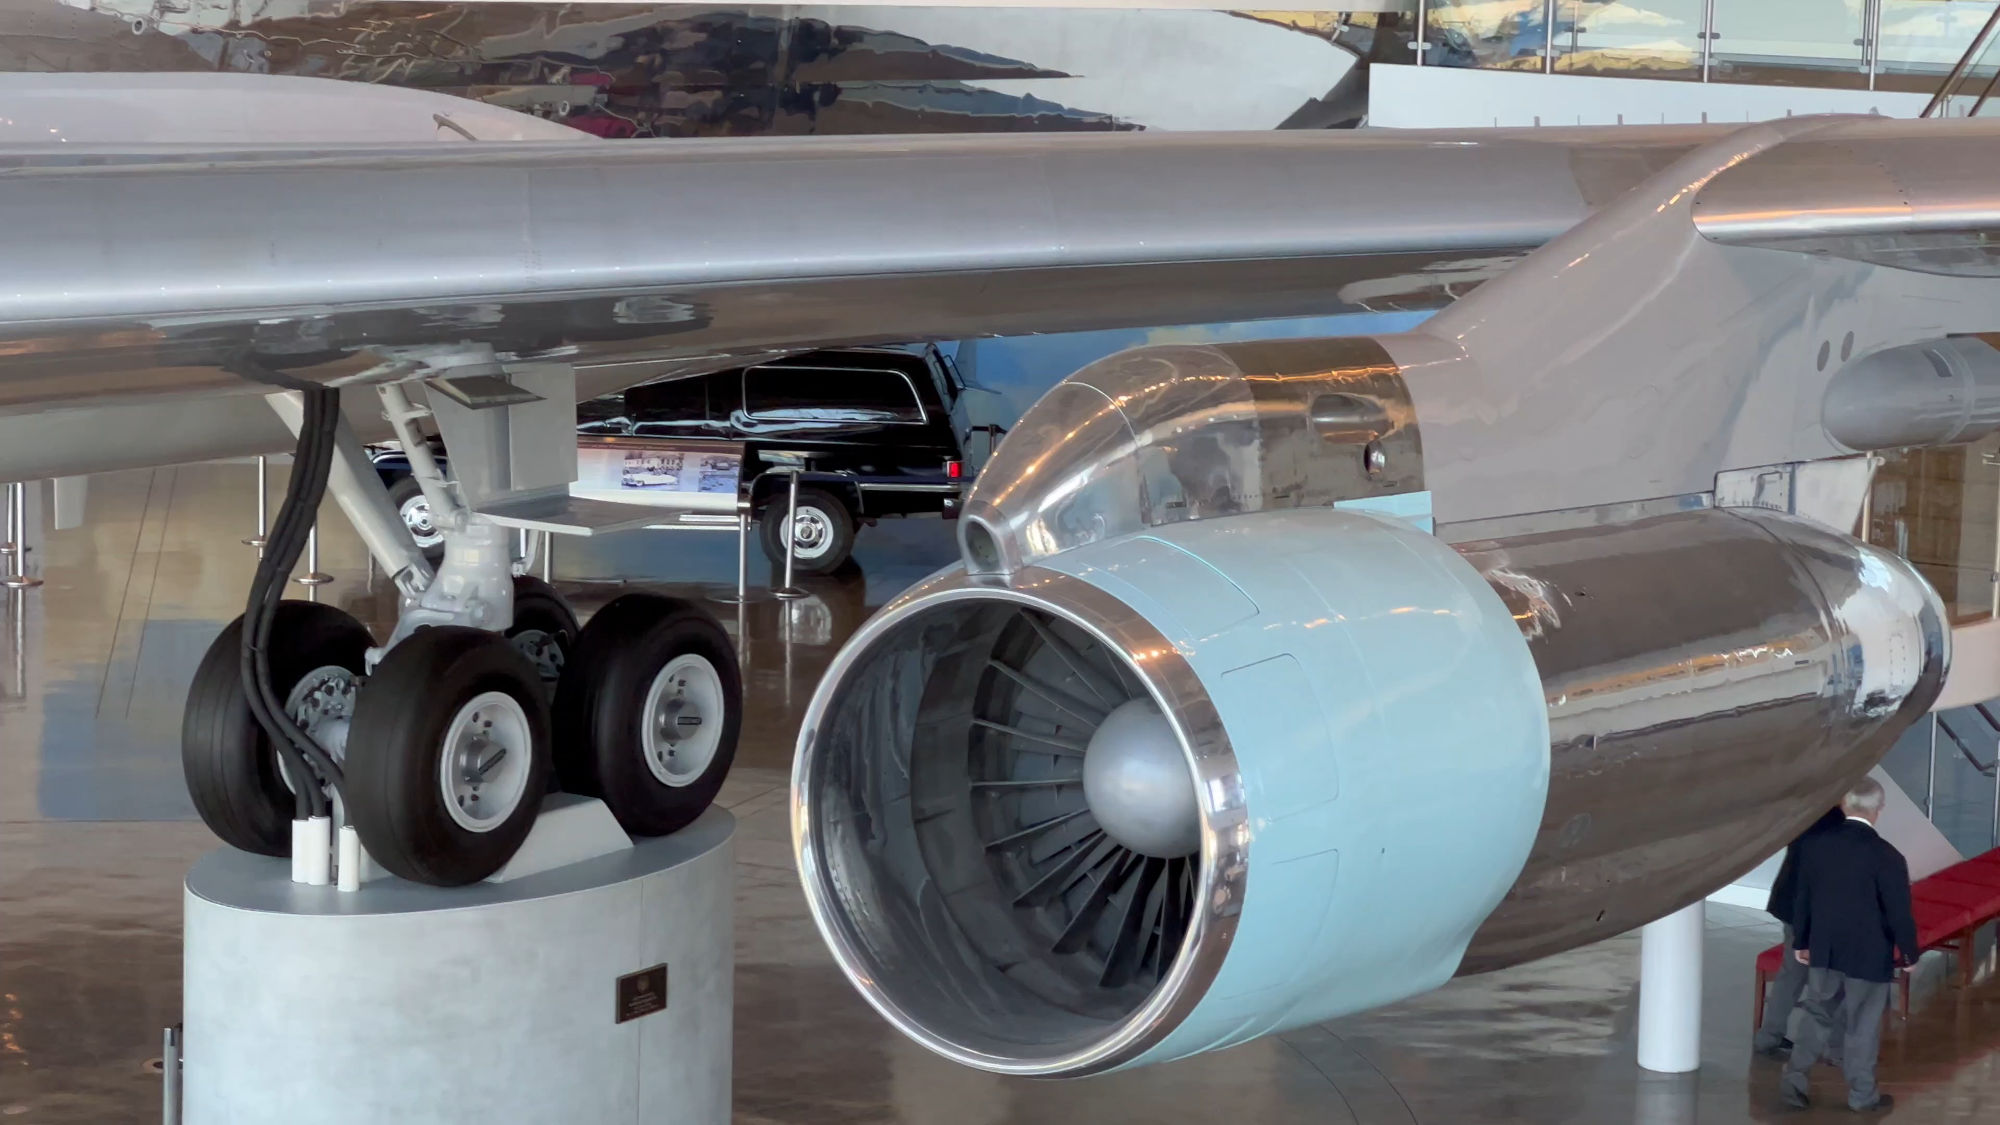 Air Force One Jet Engines